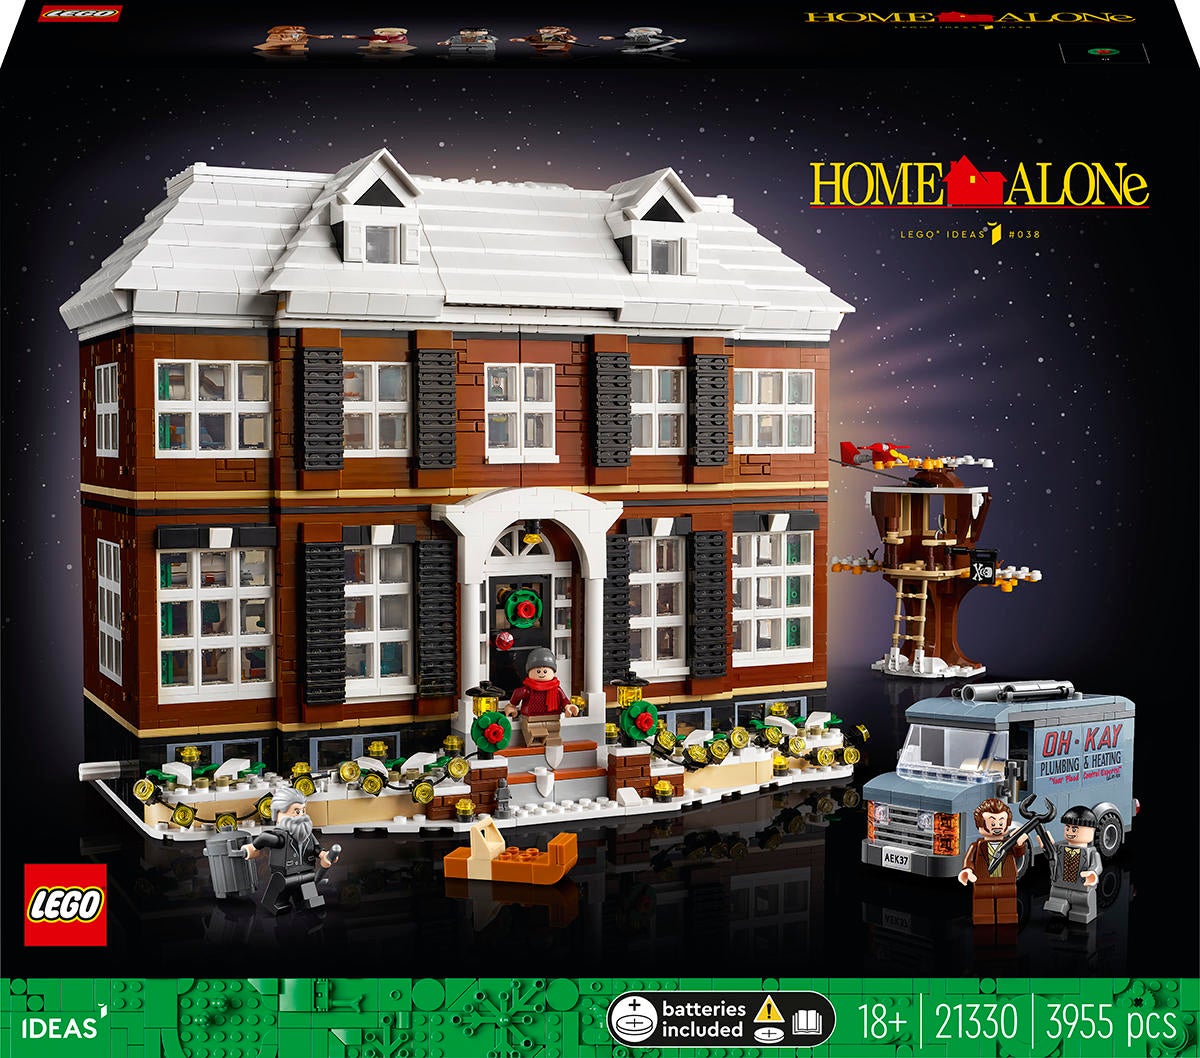 sy Bestil mareridt The Huge LEGO Ideas Home Alone House Set Is Back In Stock